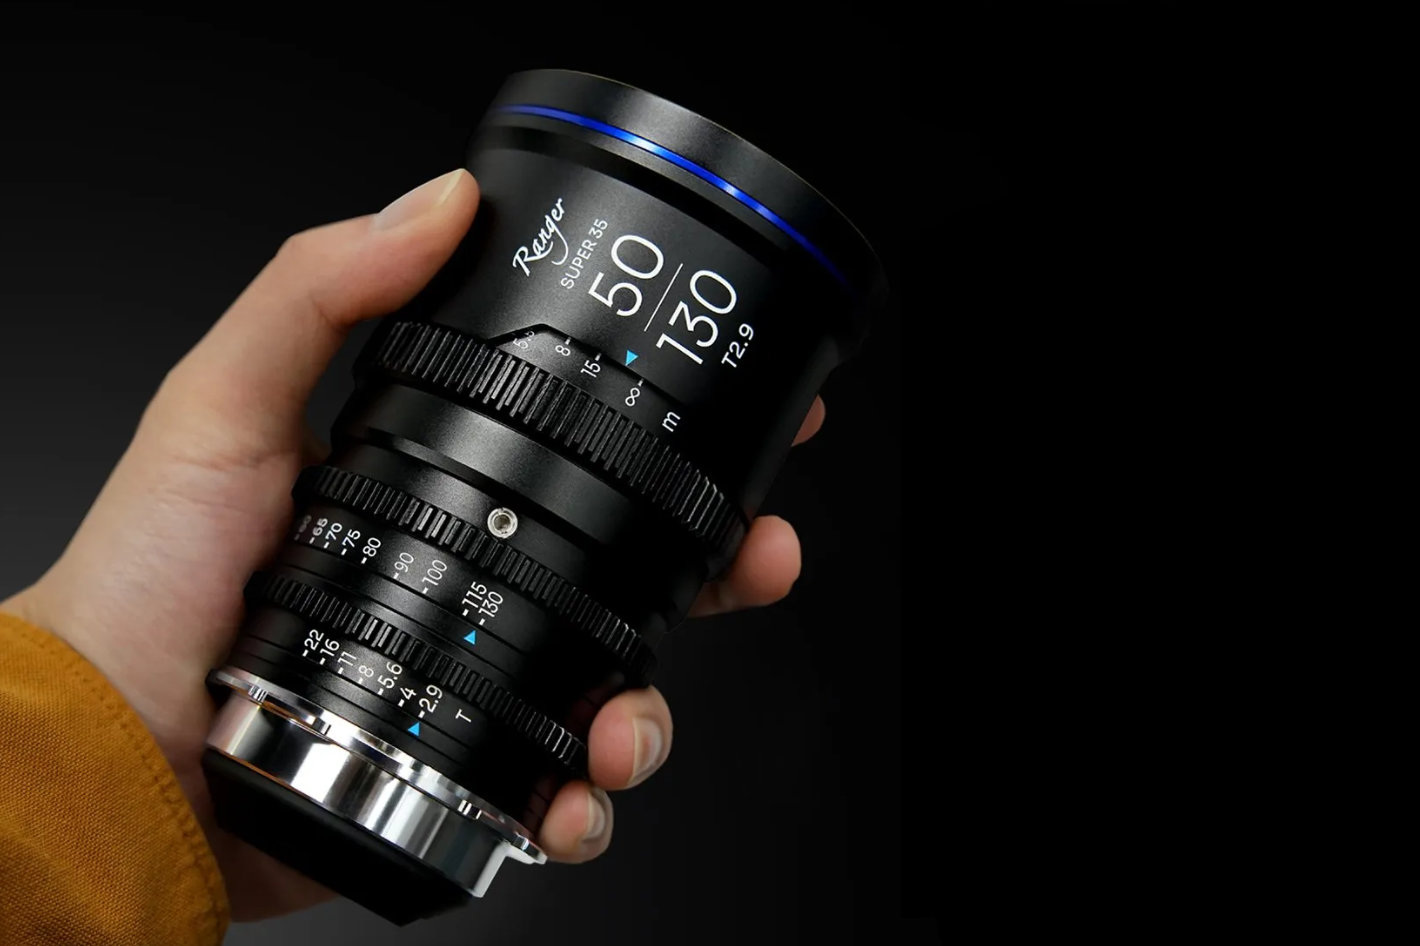 Laowa Ranger S35: cinematic pocket-size zoom available now